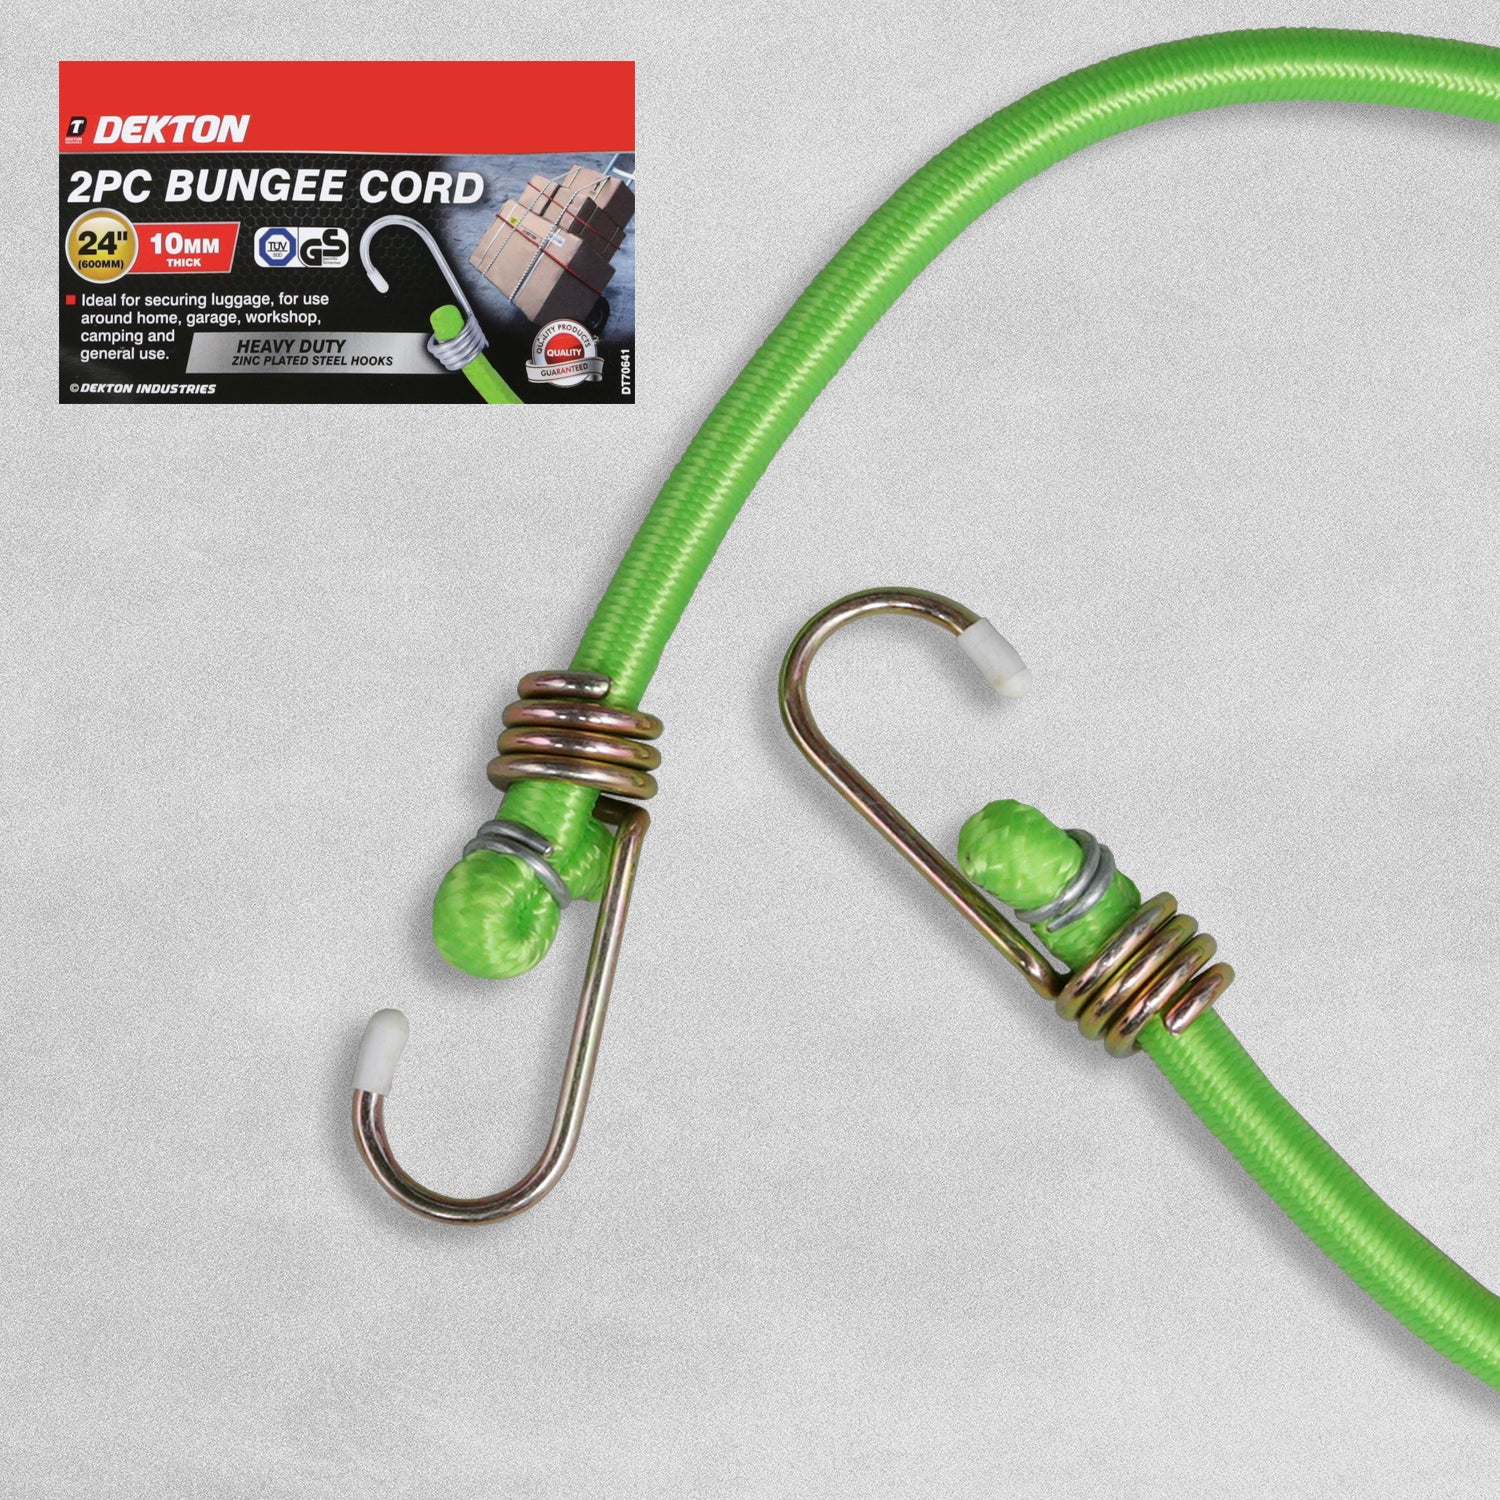 Dekton 2PC 24" 10mm Thick Bungee Cord With Zinc Plated Steel Hooks